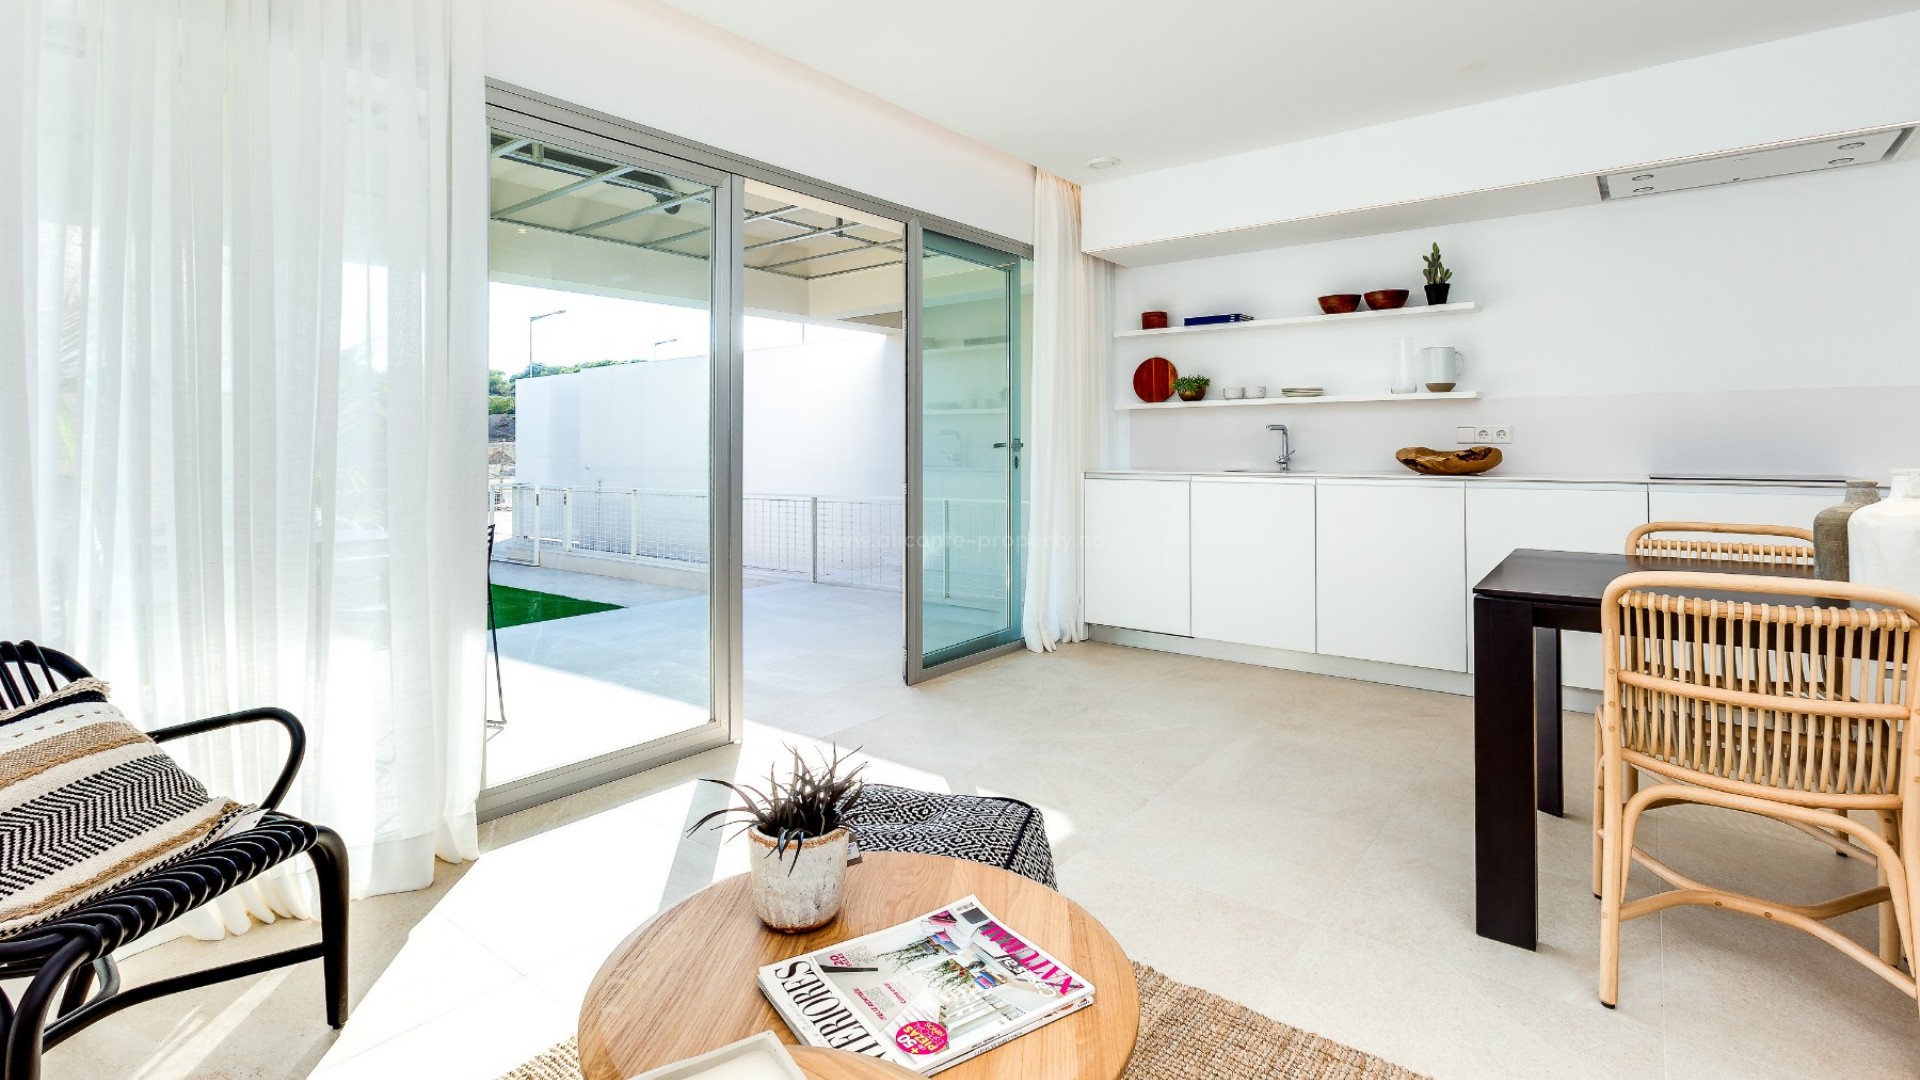 Luxury apartment in Los Balcones, Torrevieja, 2 double bedrooms, 2 bathrooms, spacious living/dining room, terrace with private pool, 5 min to beaches